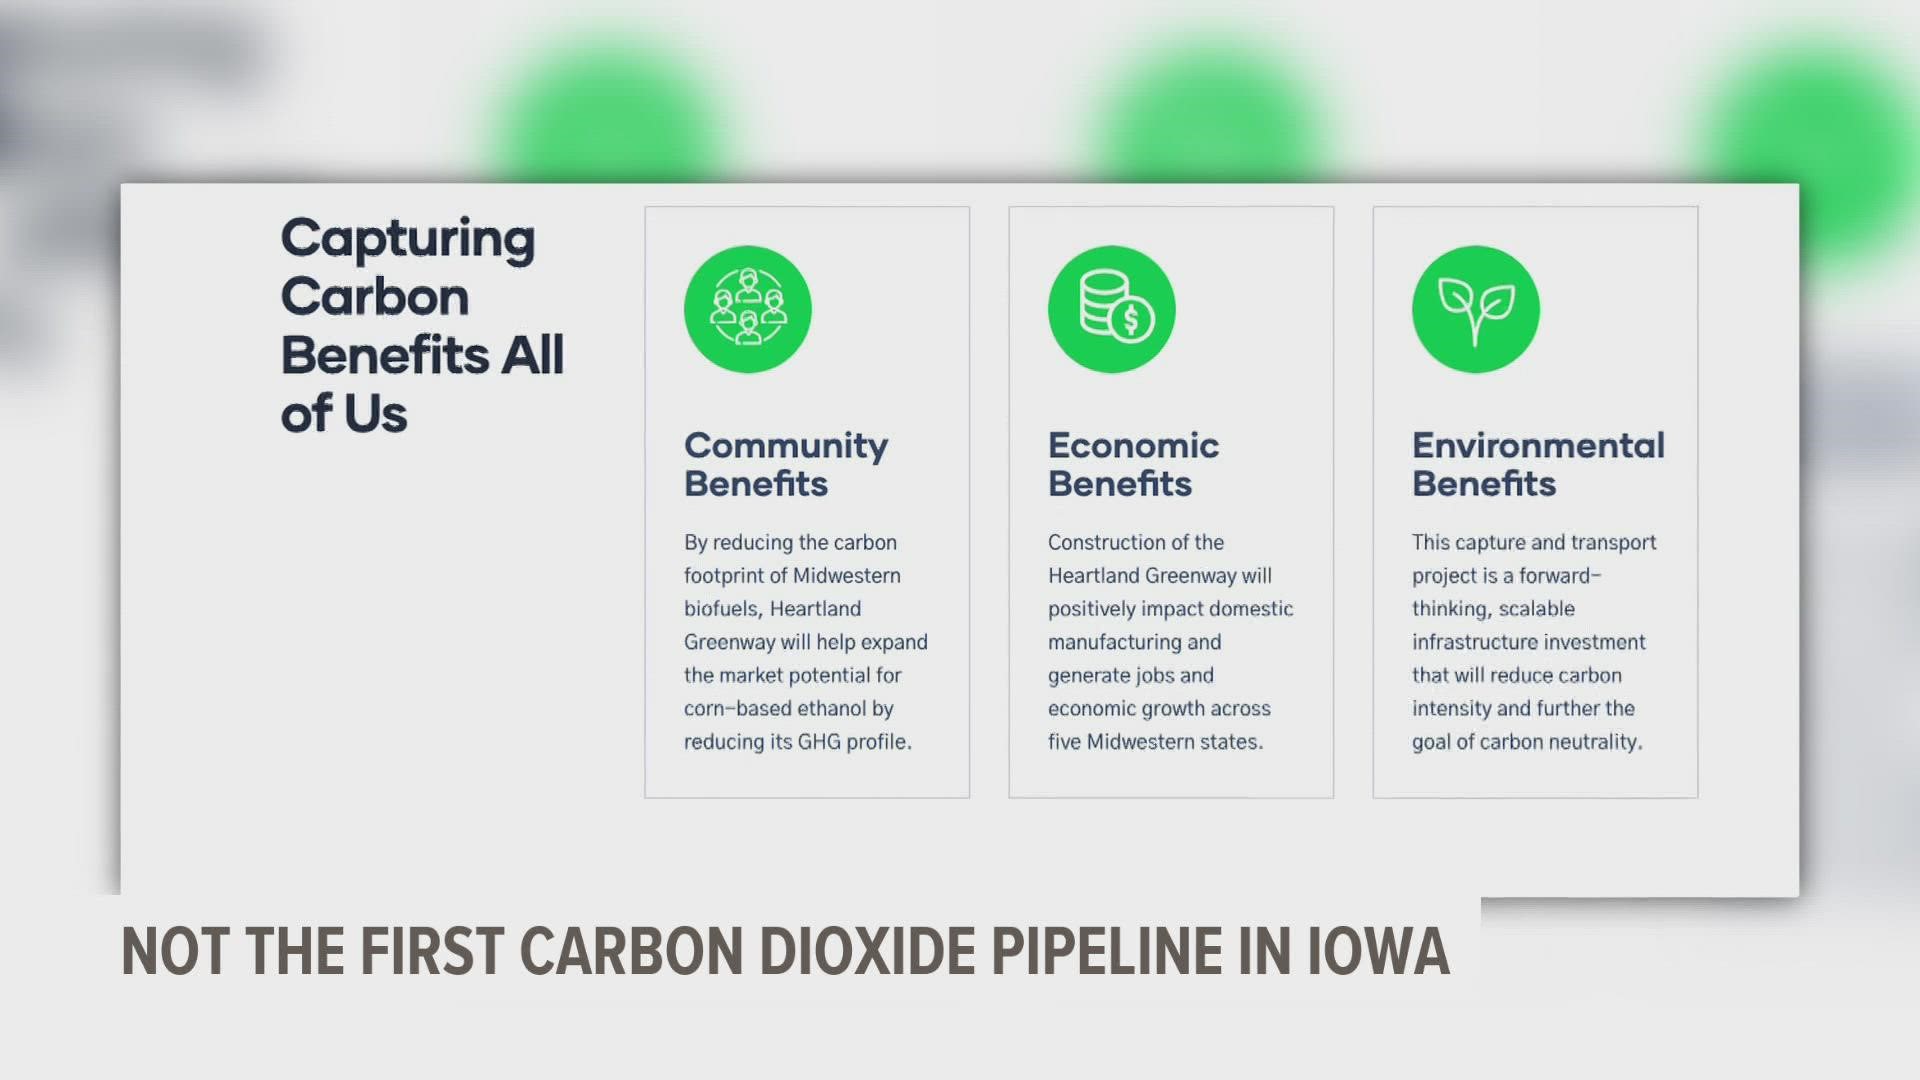 This time, Navigator CO2 Ventures plan on building a 1,300-mile carbon dioxide emissions pipeline to be permanently sequestered in Illinois